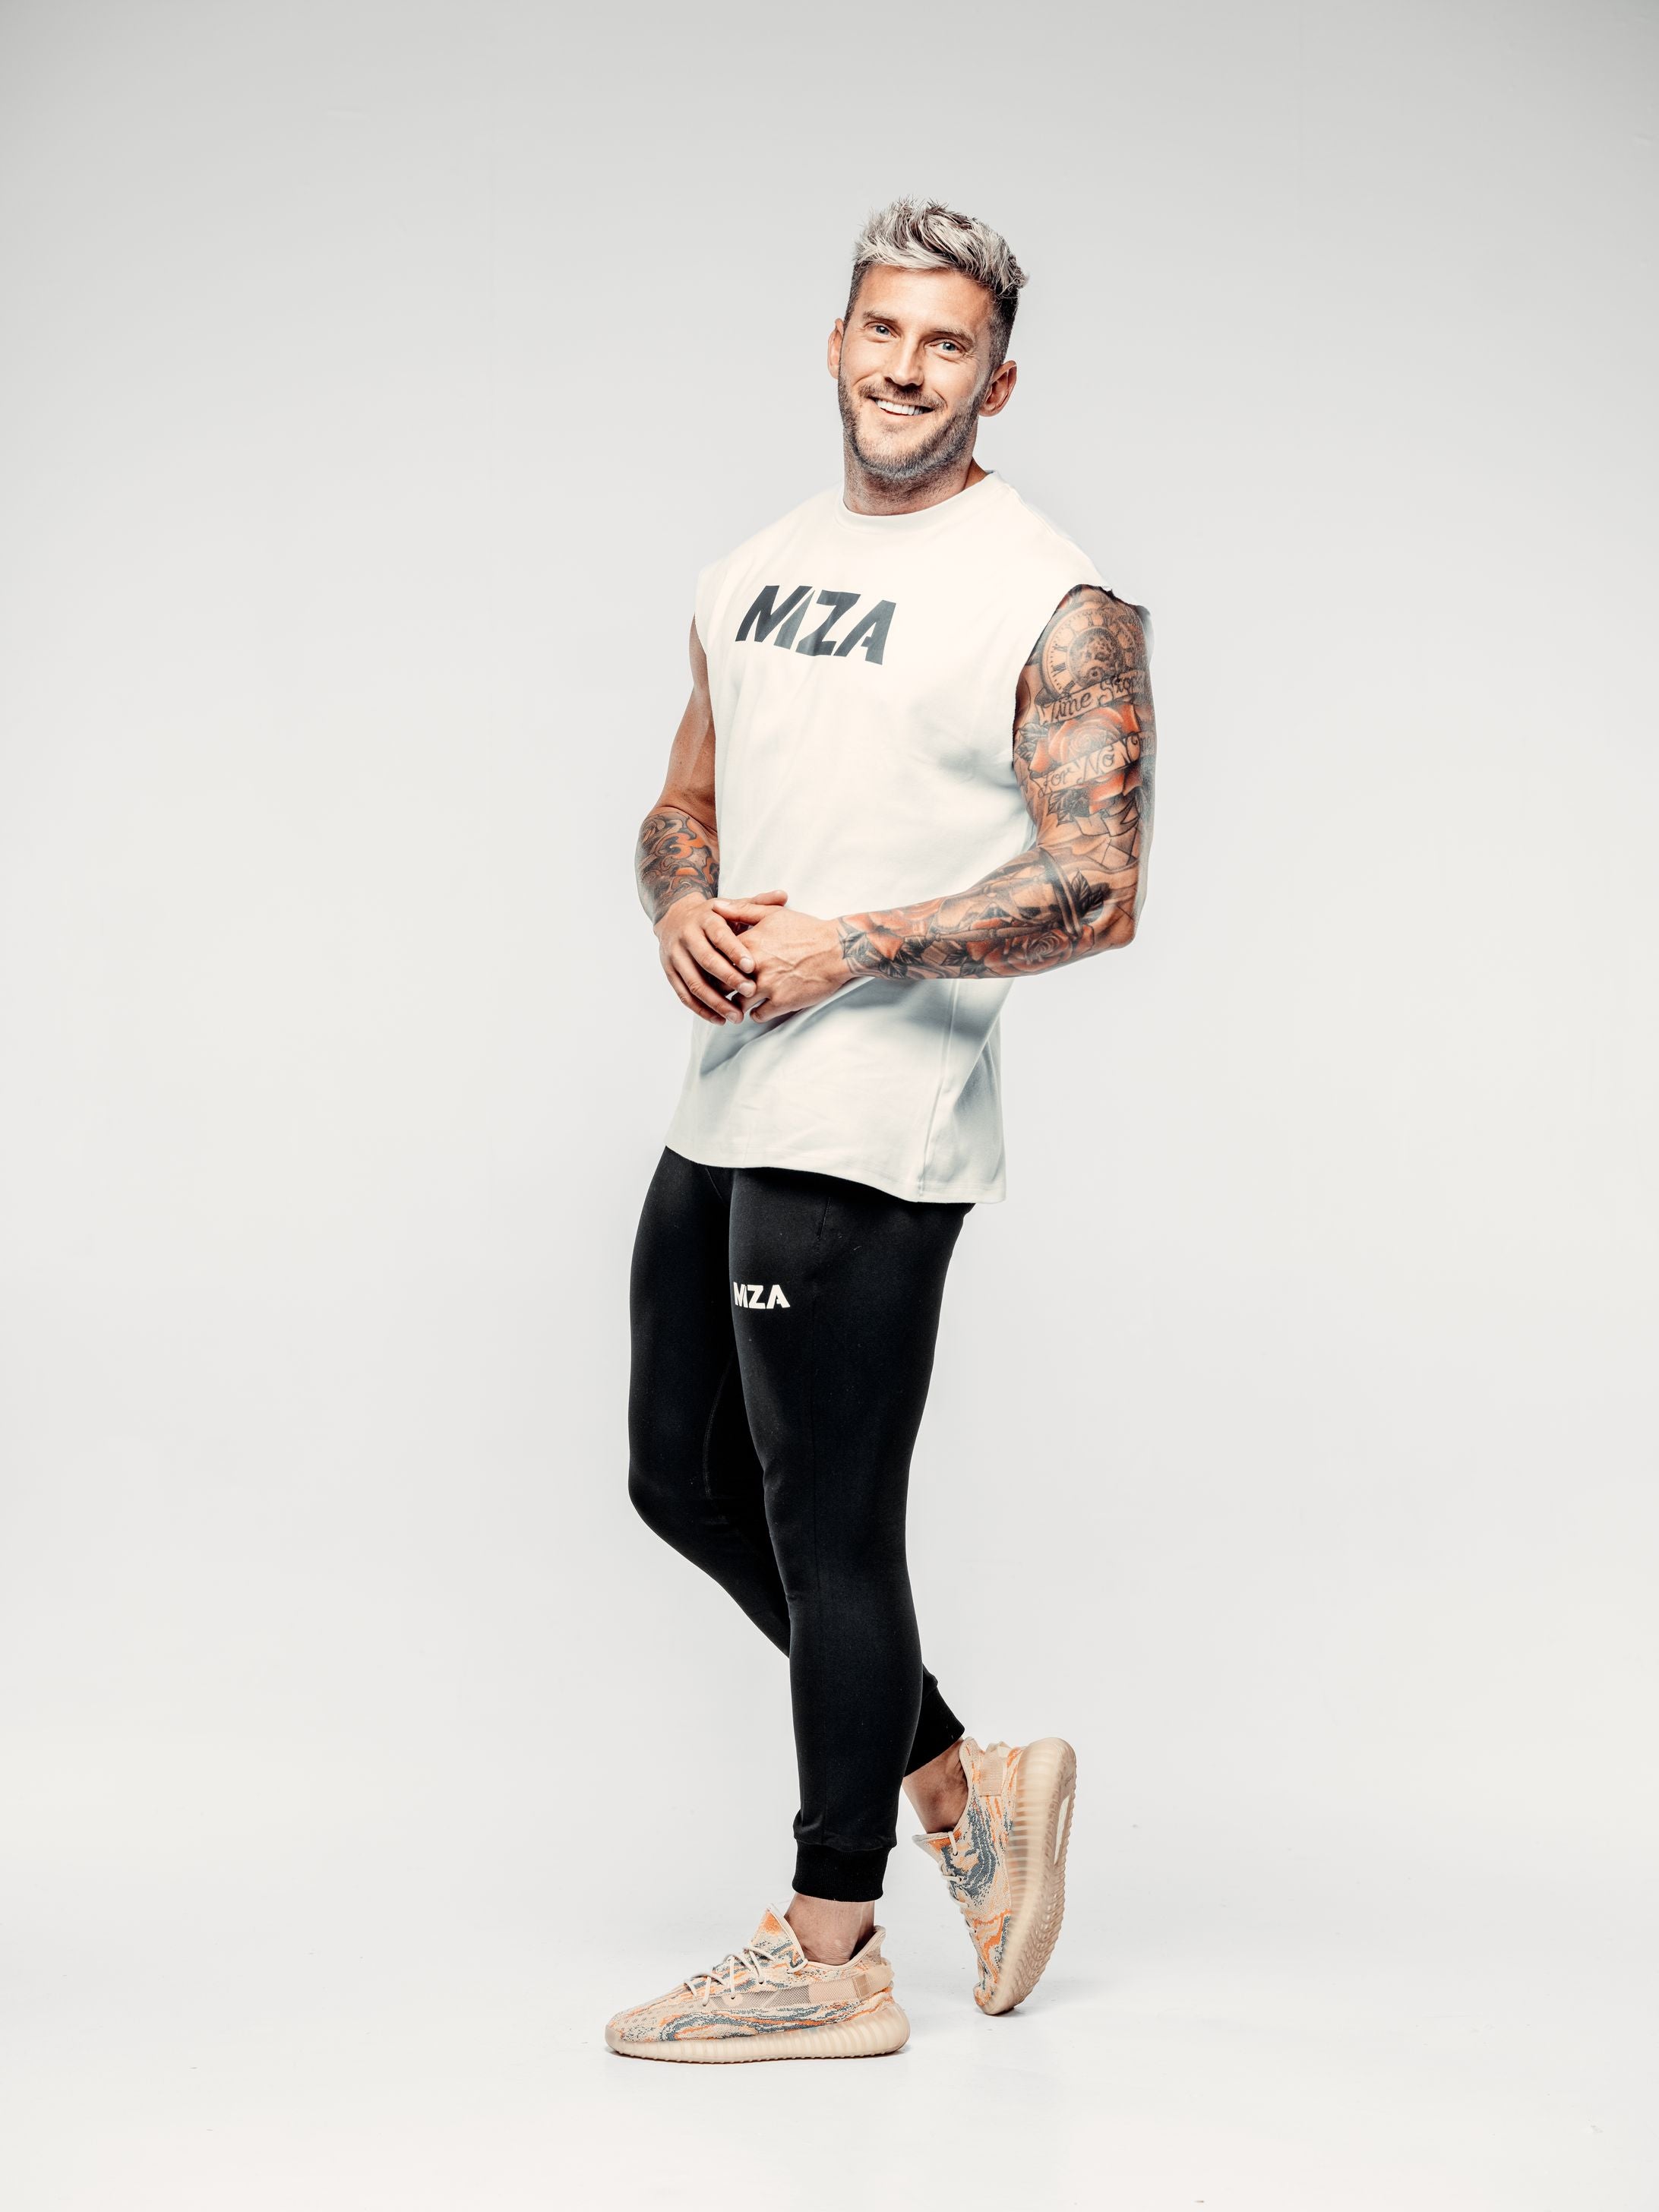 Shane is in a relaxed posed wearing the new standard vest in white